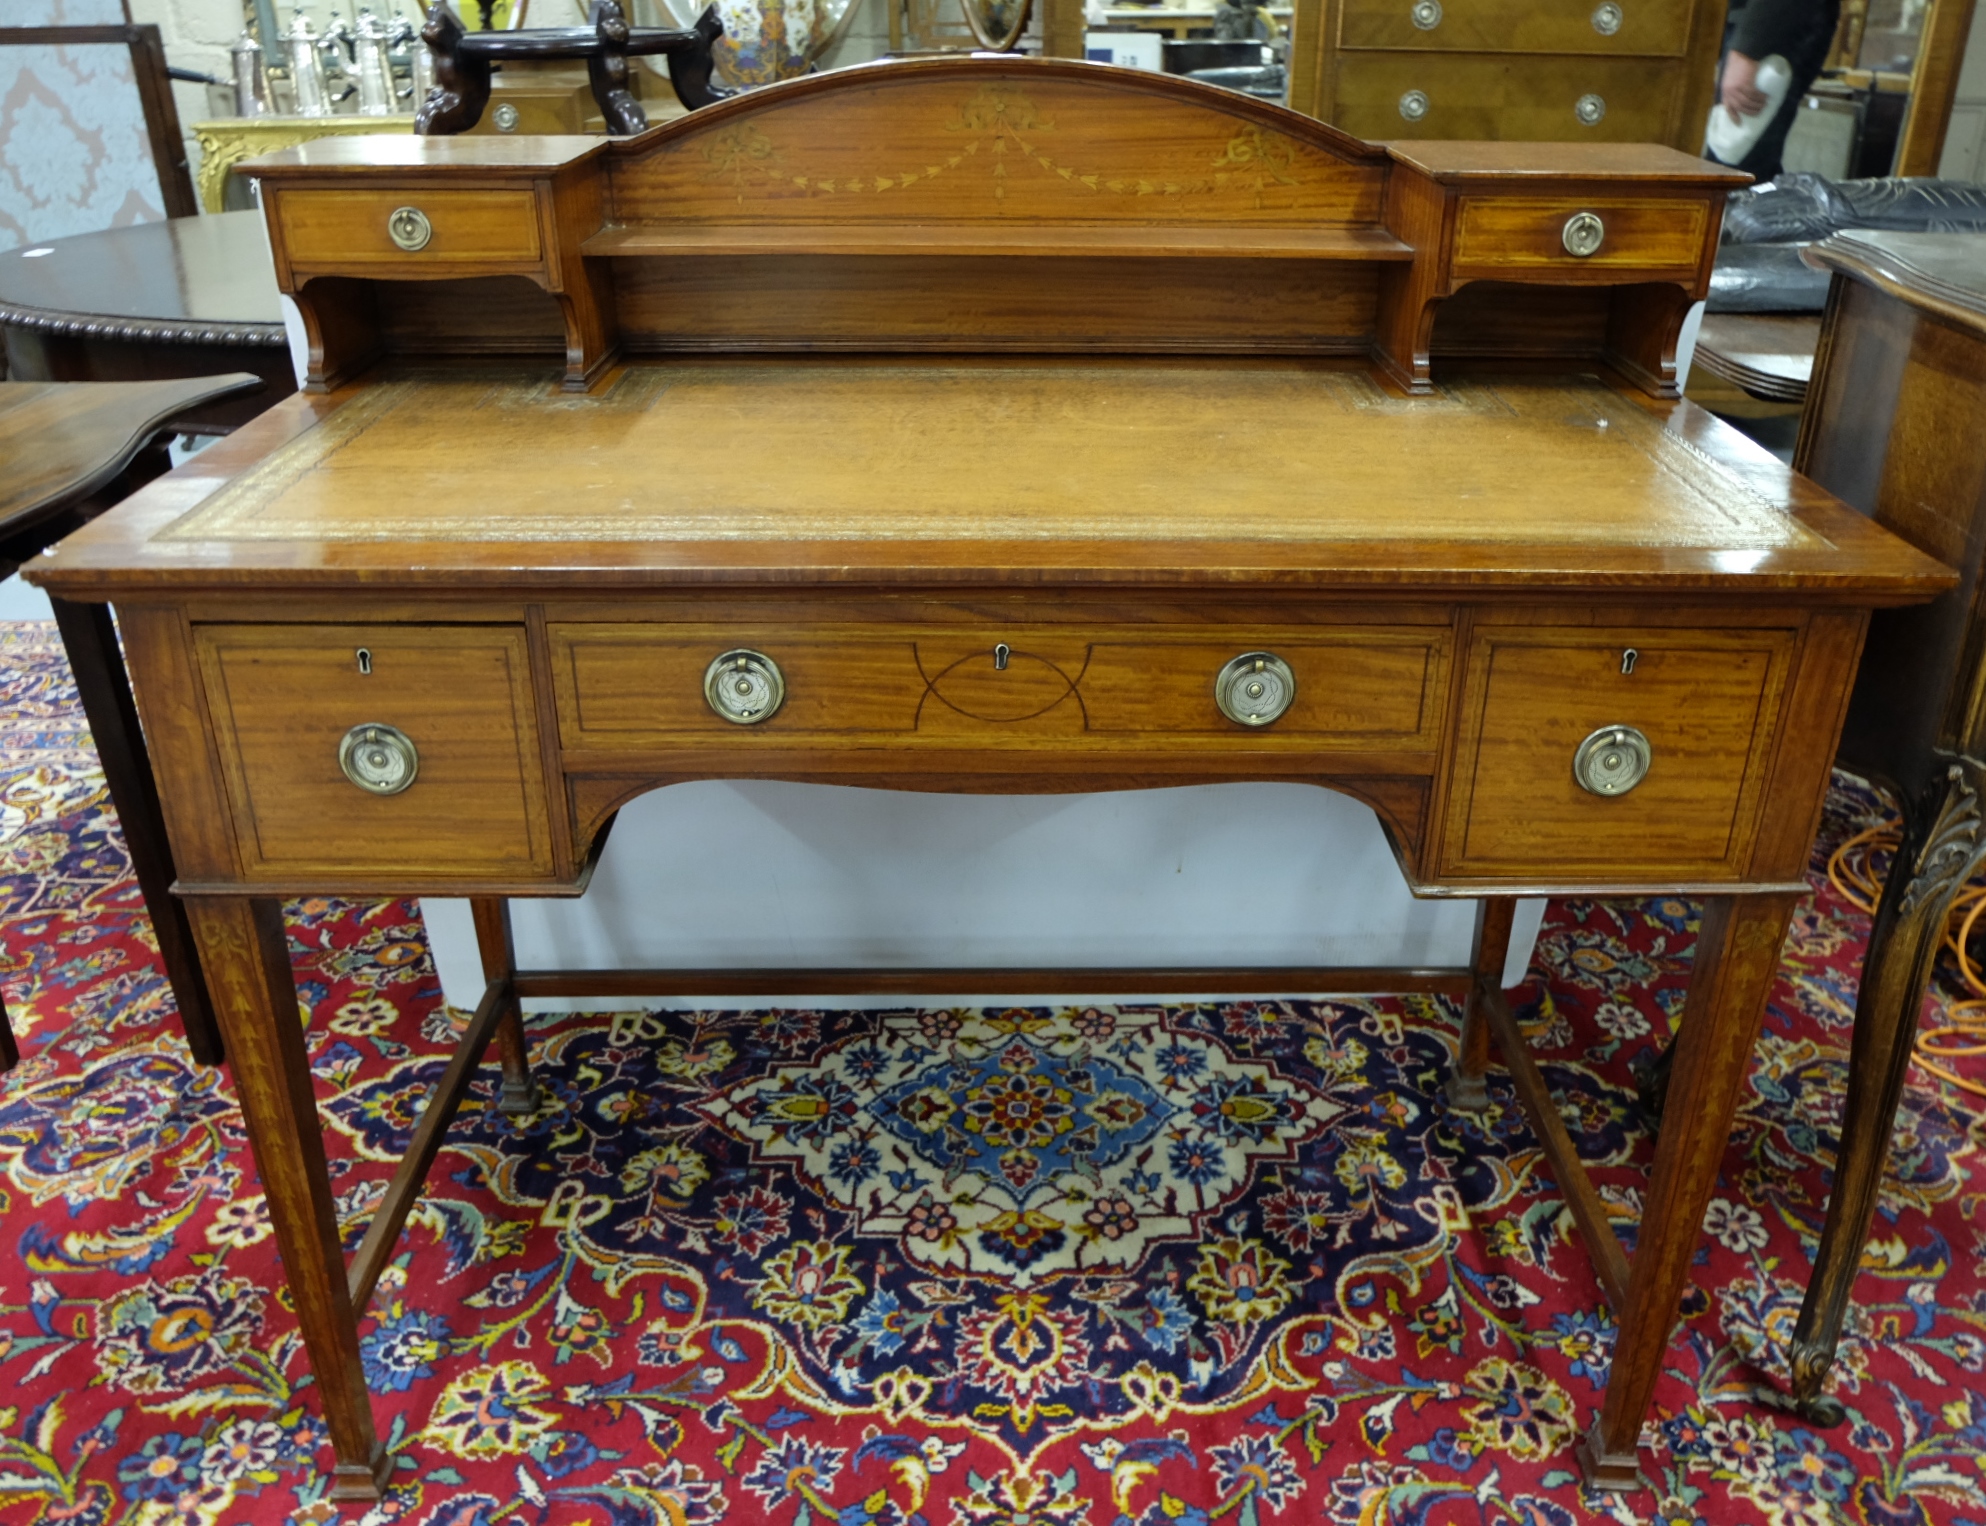 Lovely Edwardian Satinwood Desk, finely inlaid, a raised gallery with 2 drawers over a tooled tan